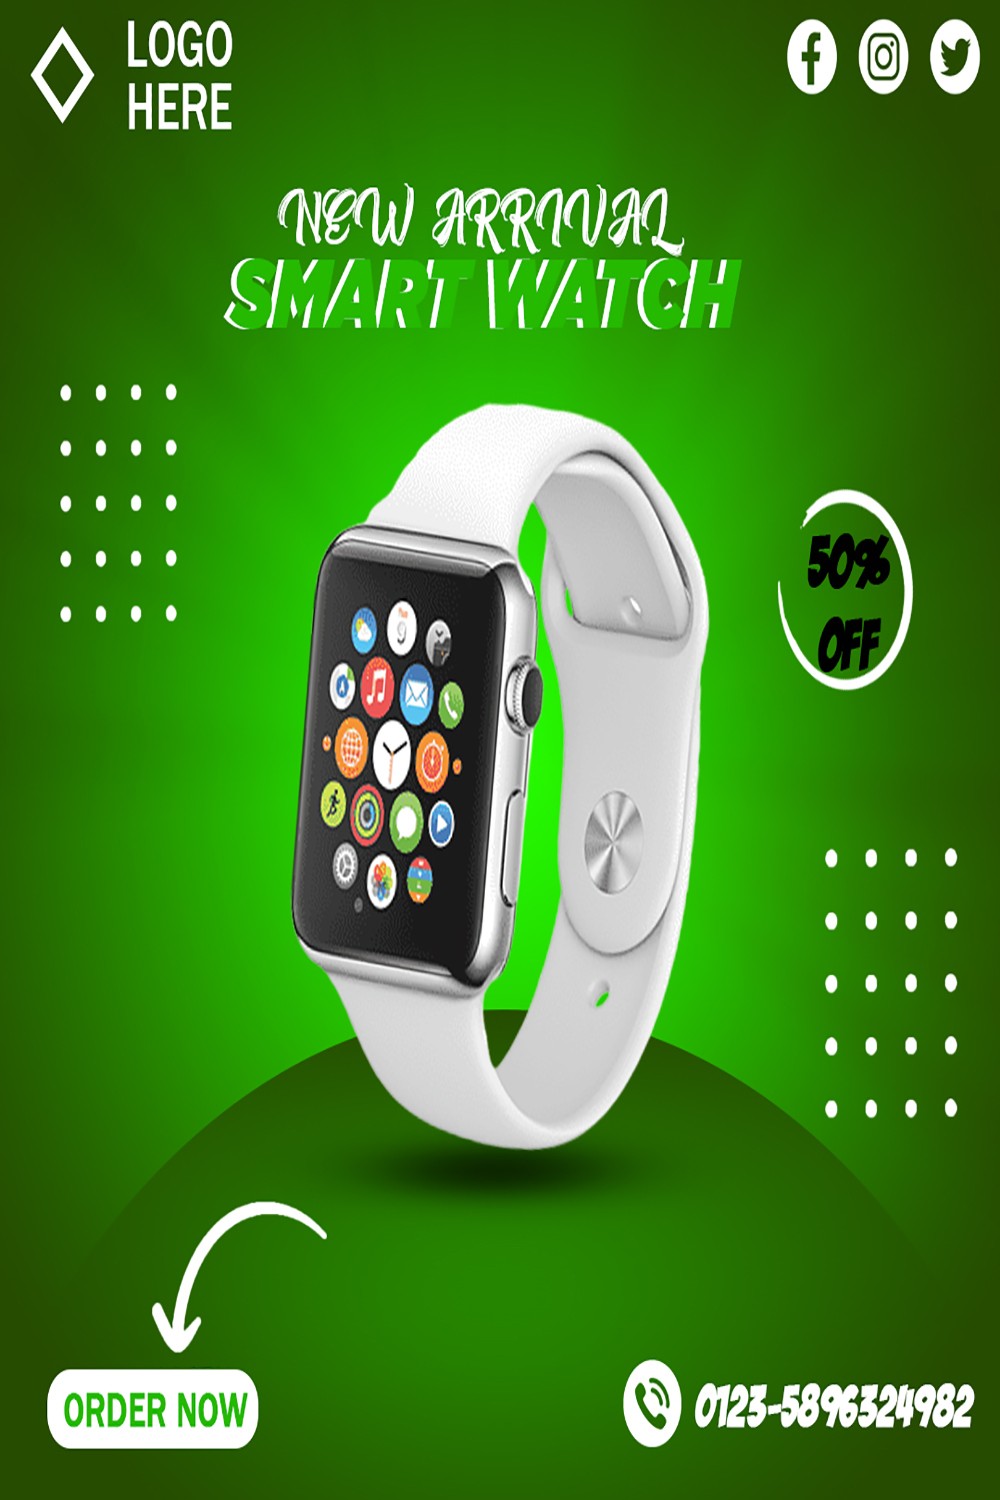 Smart Watch Social Media Post pinterest preview image.